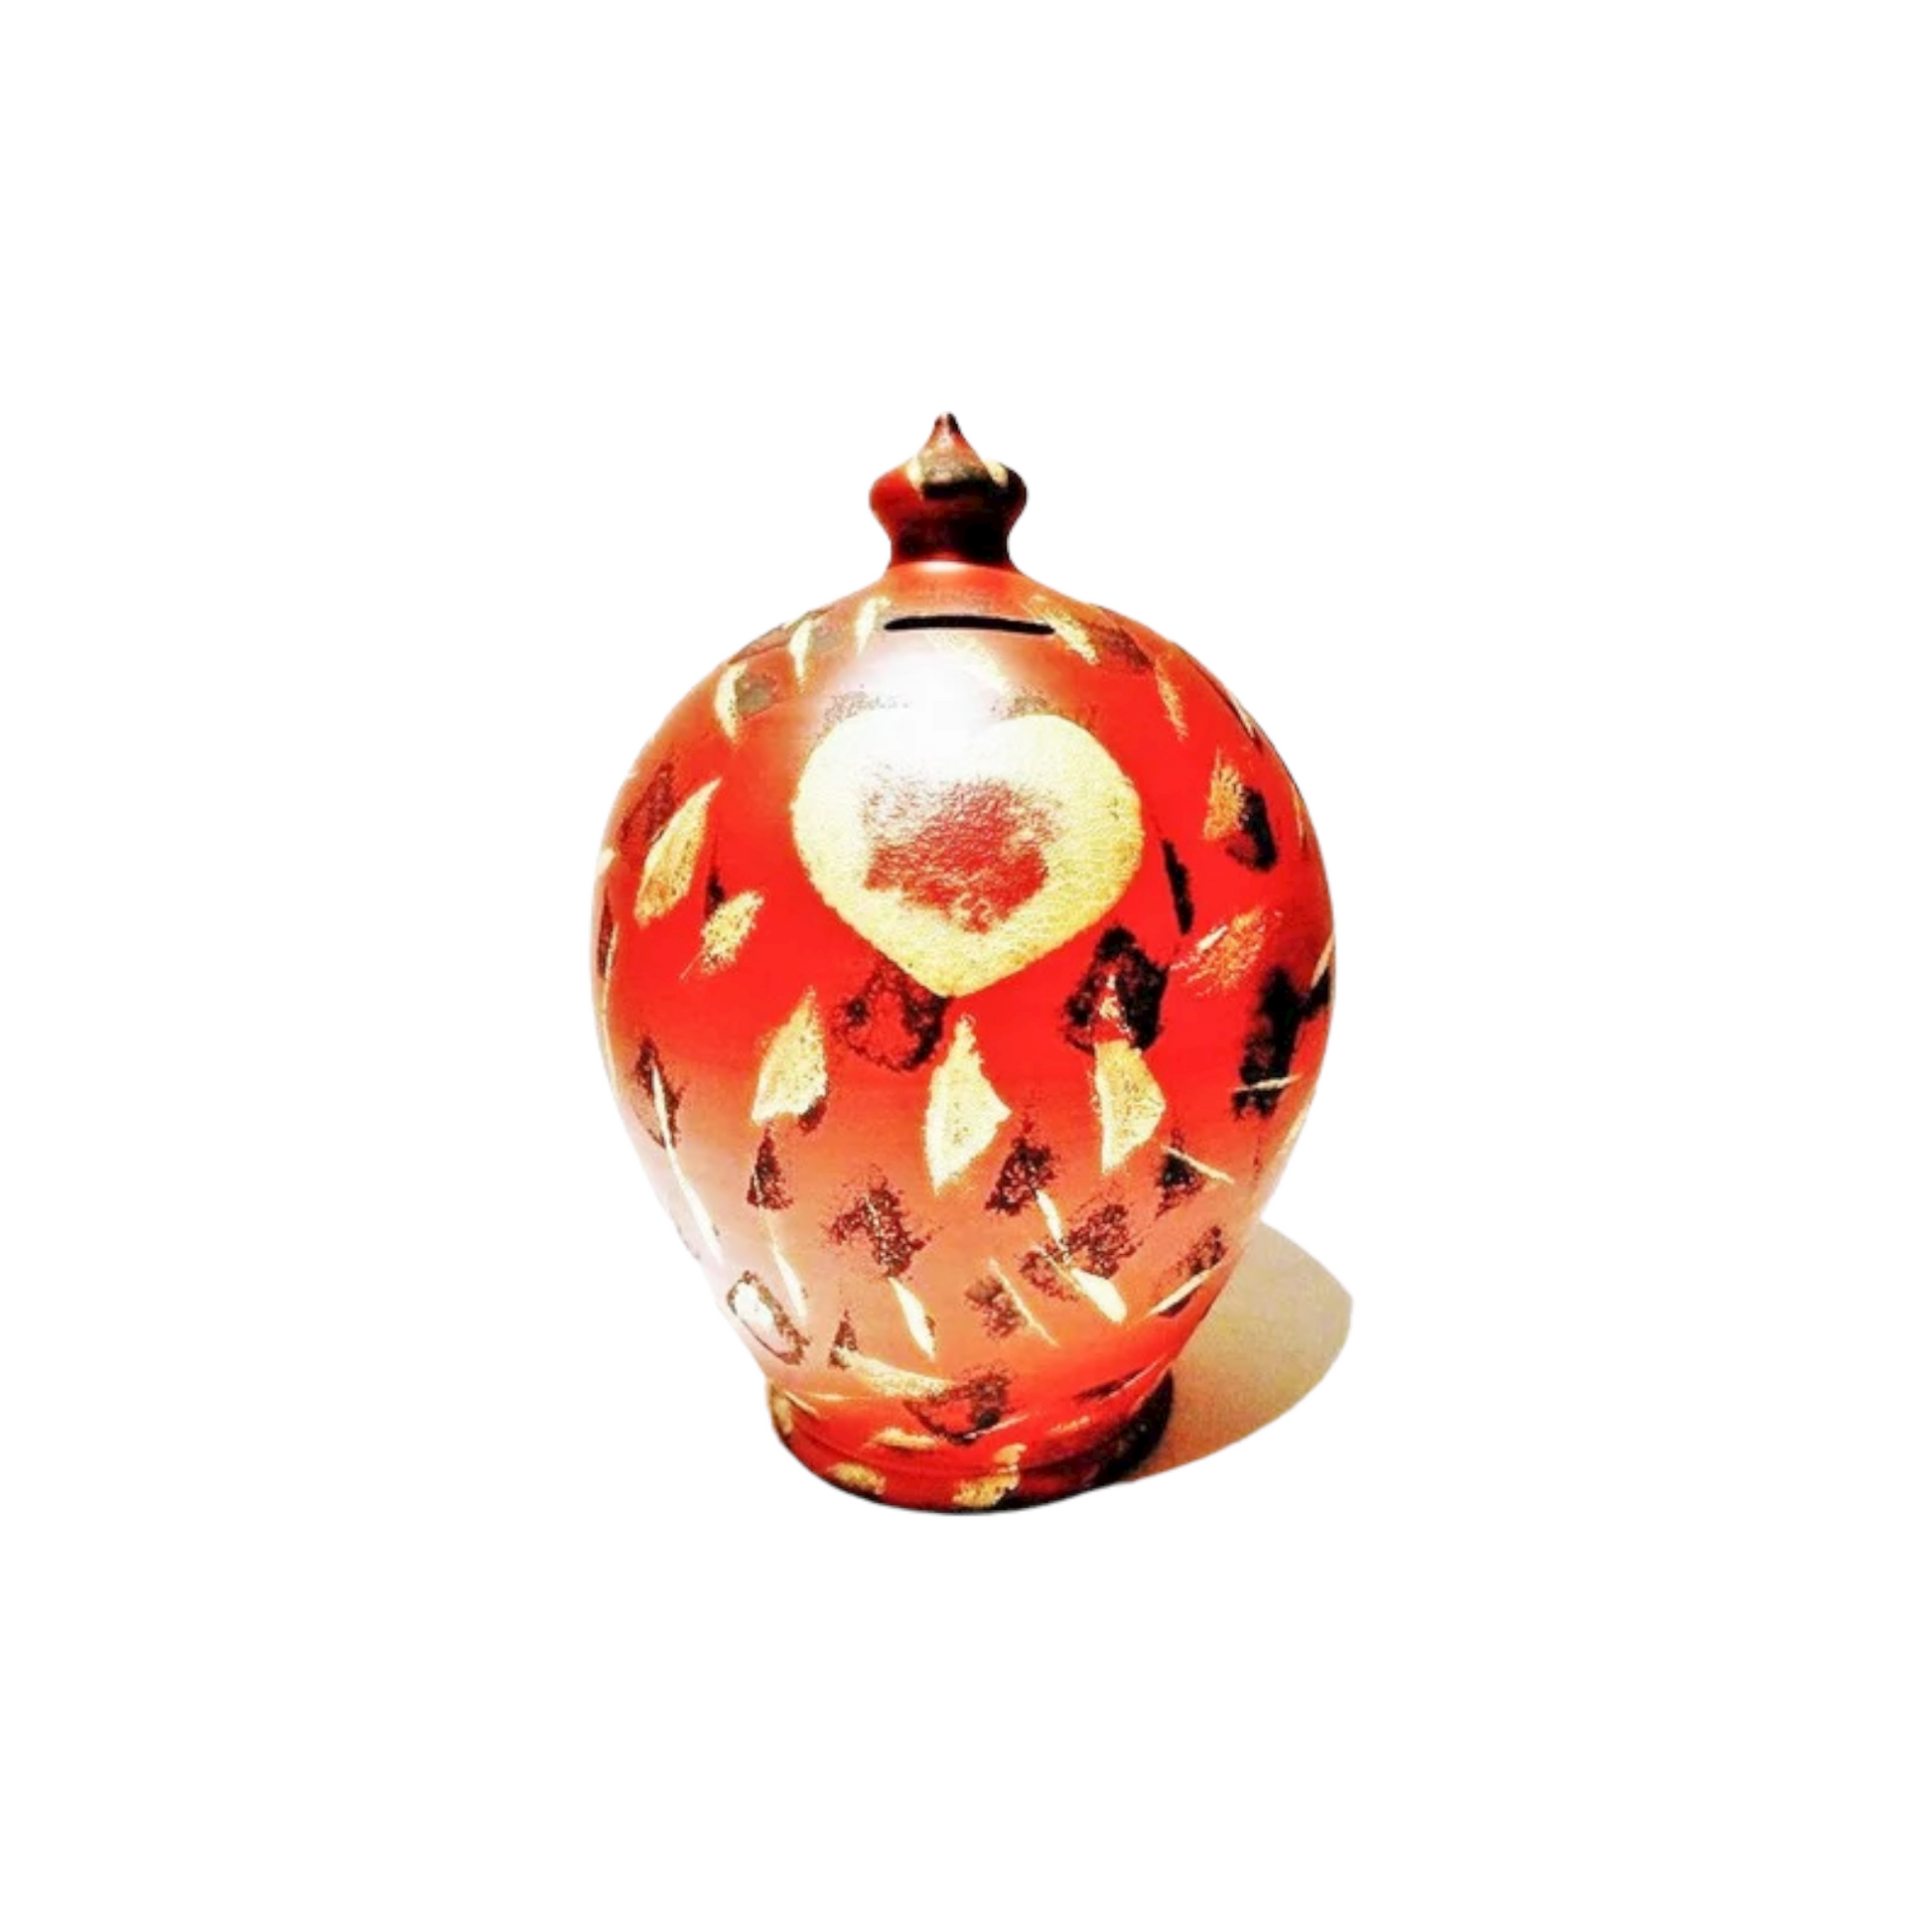 Colors: Red, gold, black. Heart: Gold and red. 💰Size: 15 cm = 5.90 inches in height. Circumference: 40 cm = 15.74 inches. With hole and stopper plug, or without hole.